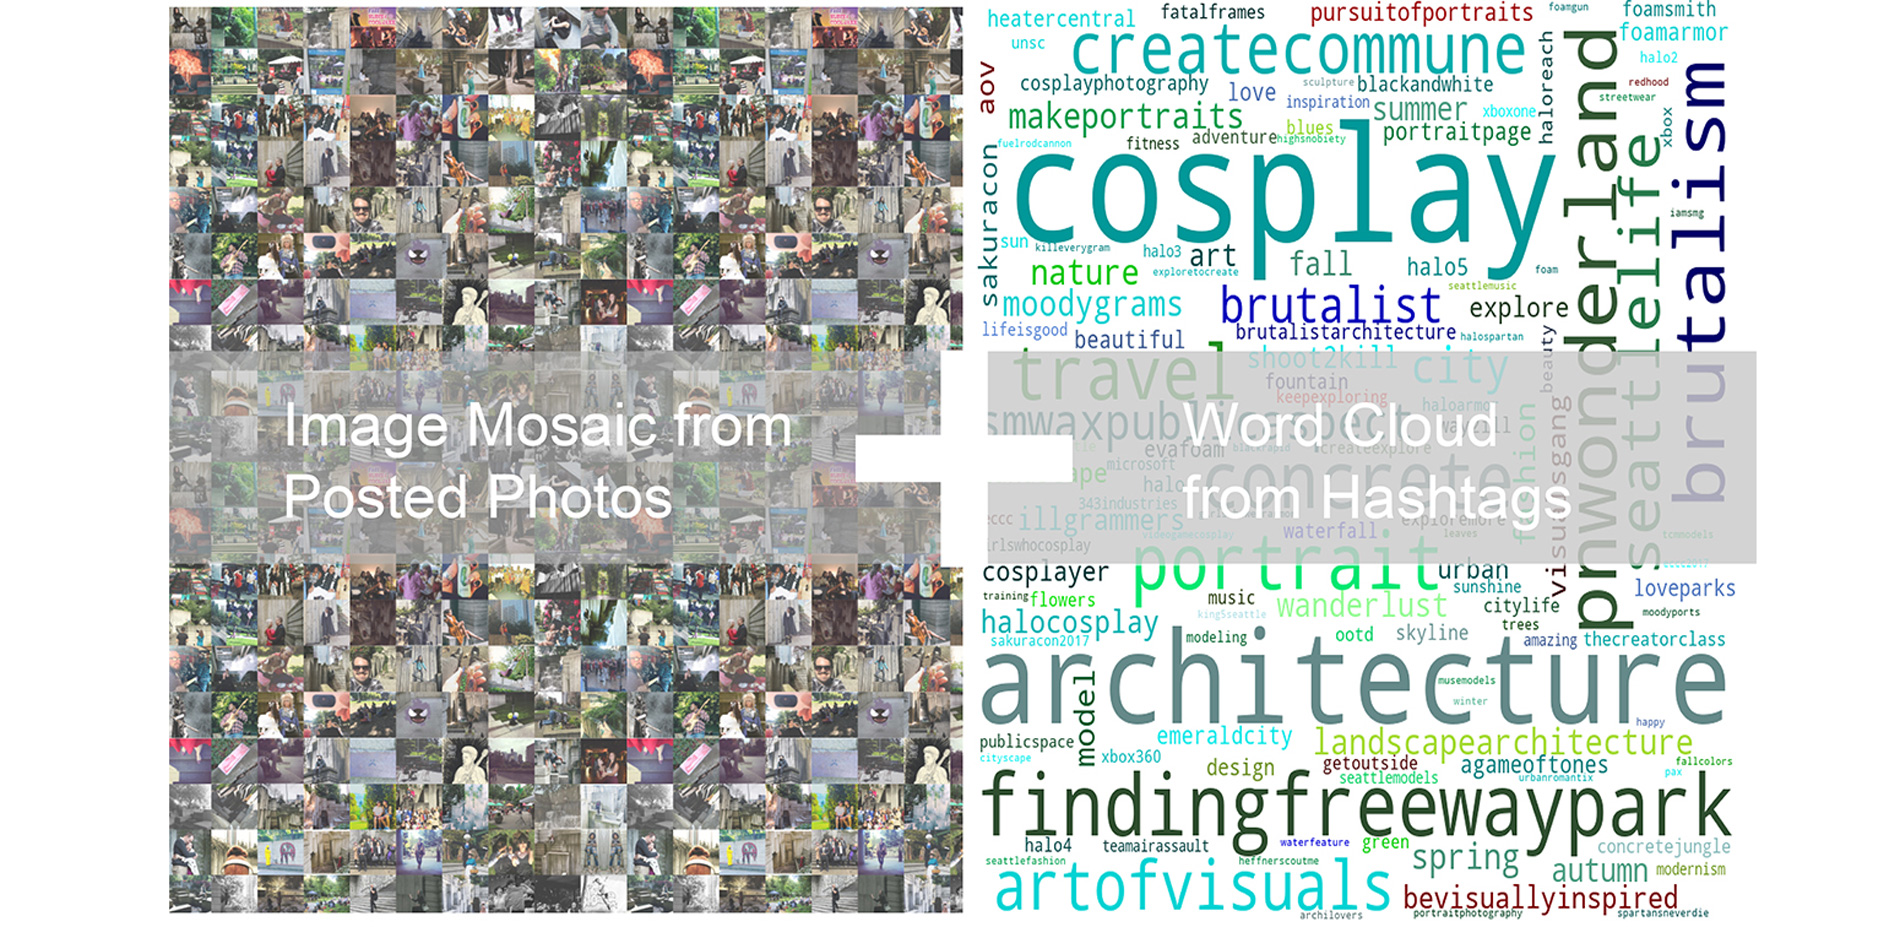 Photos and Hashtags as Two Major Datasets